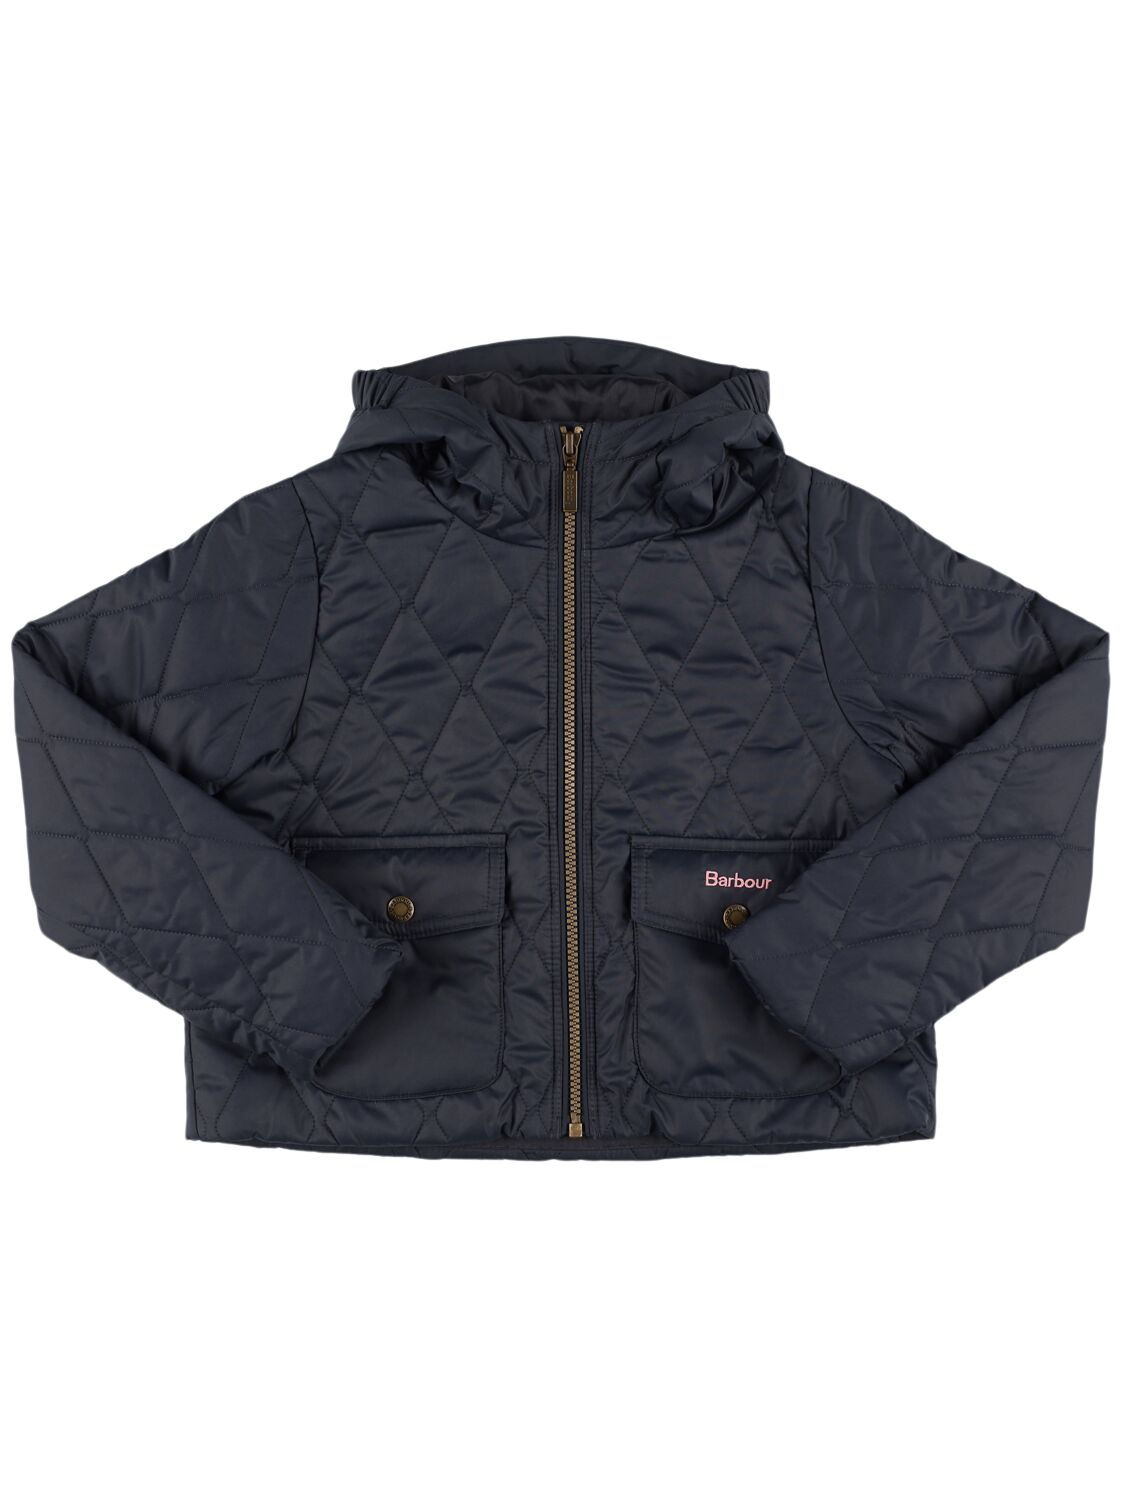 Barbour Kids' Venton Quilted Puffer Jacket In Black